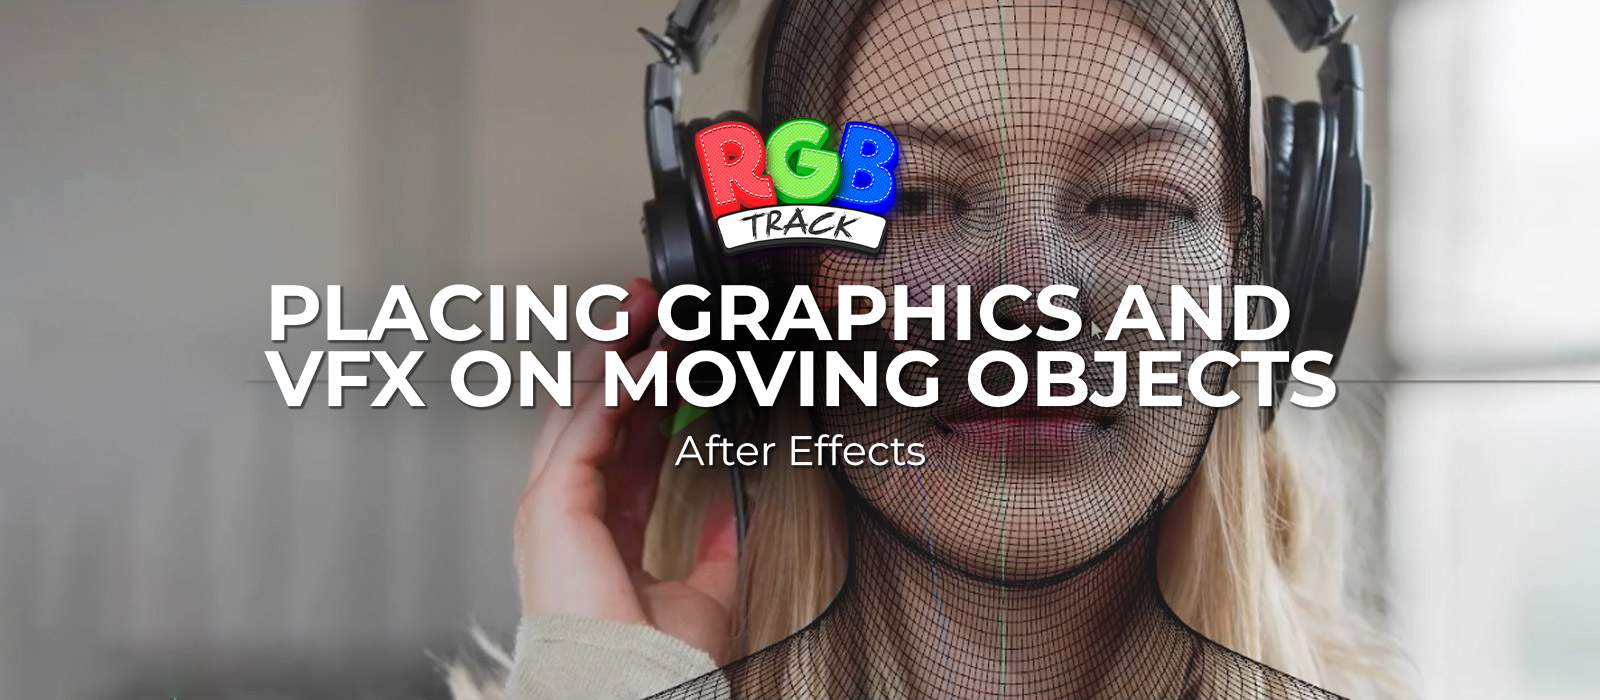 After Effects - Placing Graphics and VFX on Moving